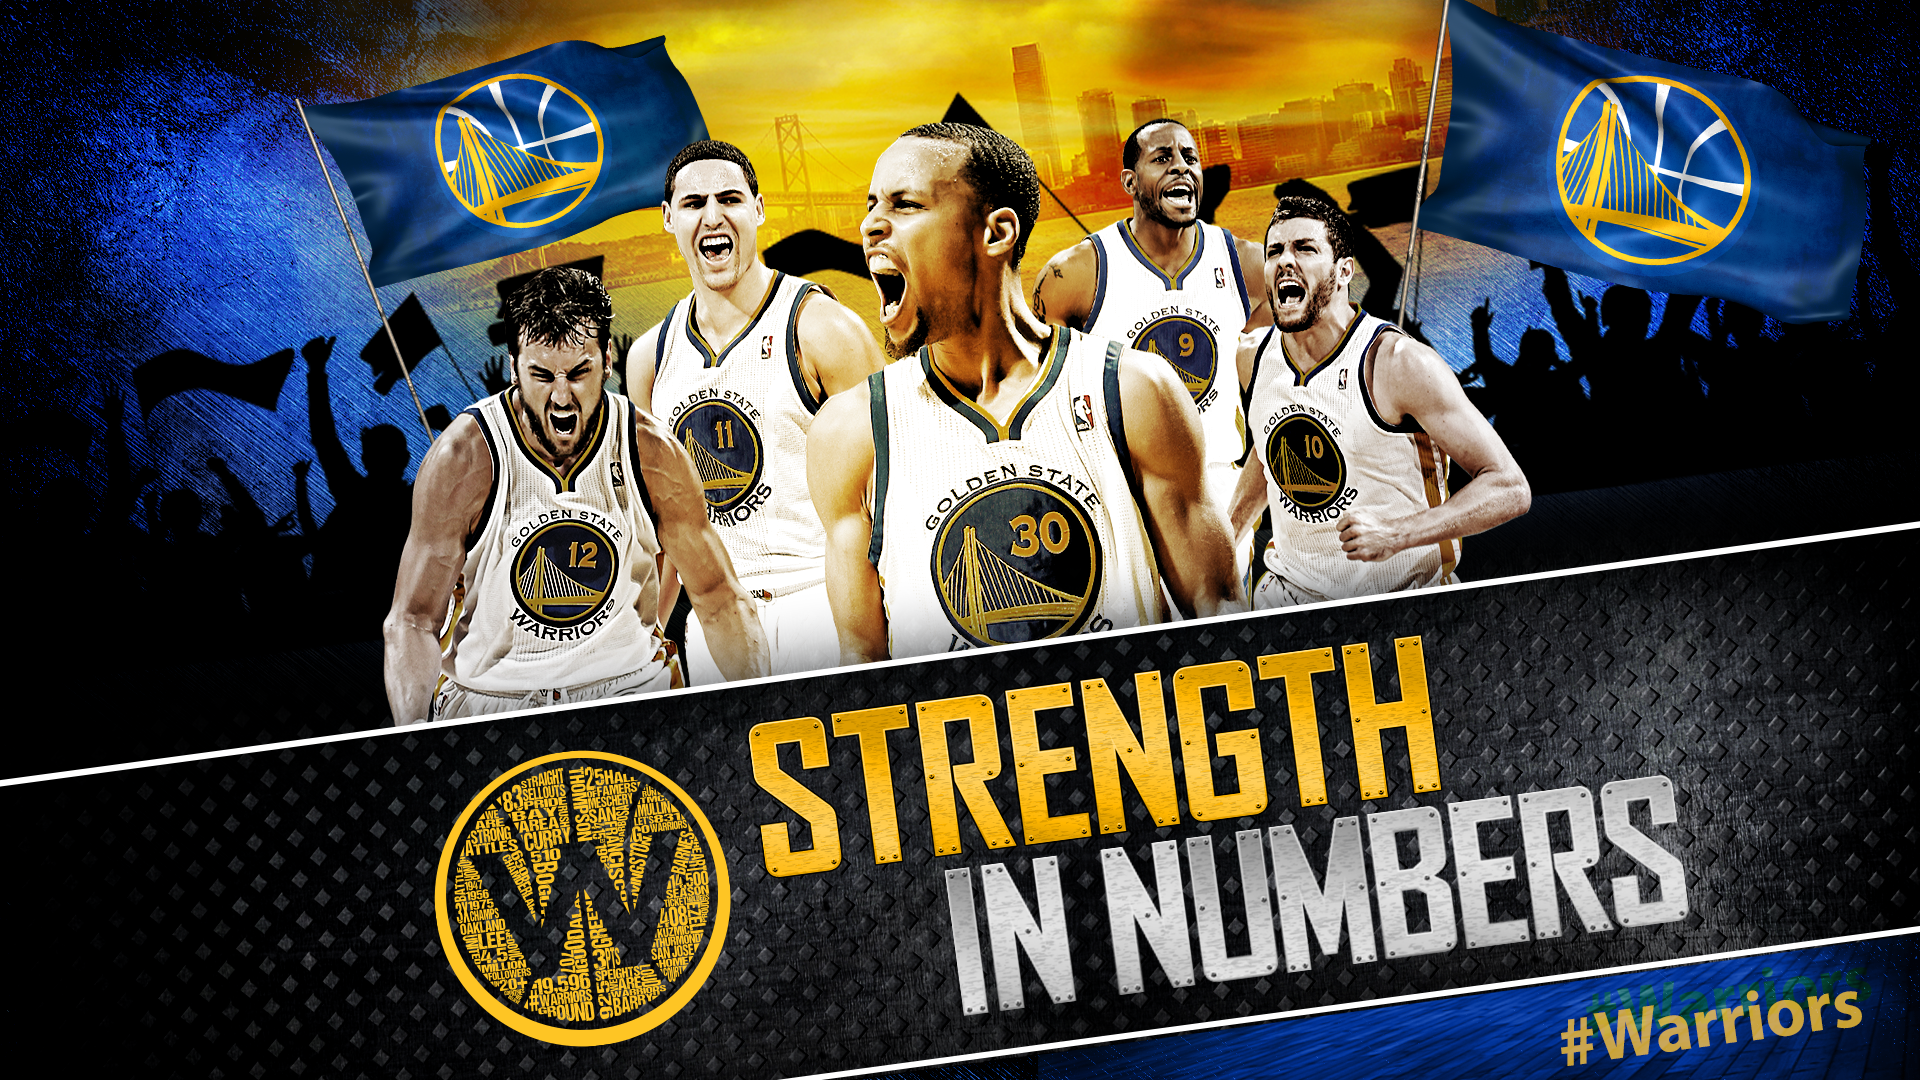 Strengthinnumbers Strength Numbers And Warriors